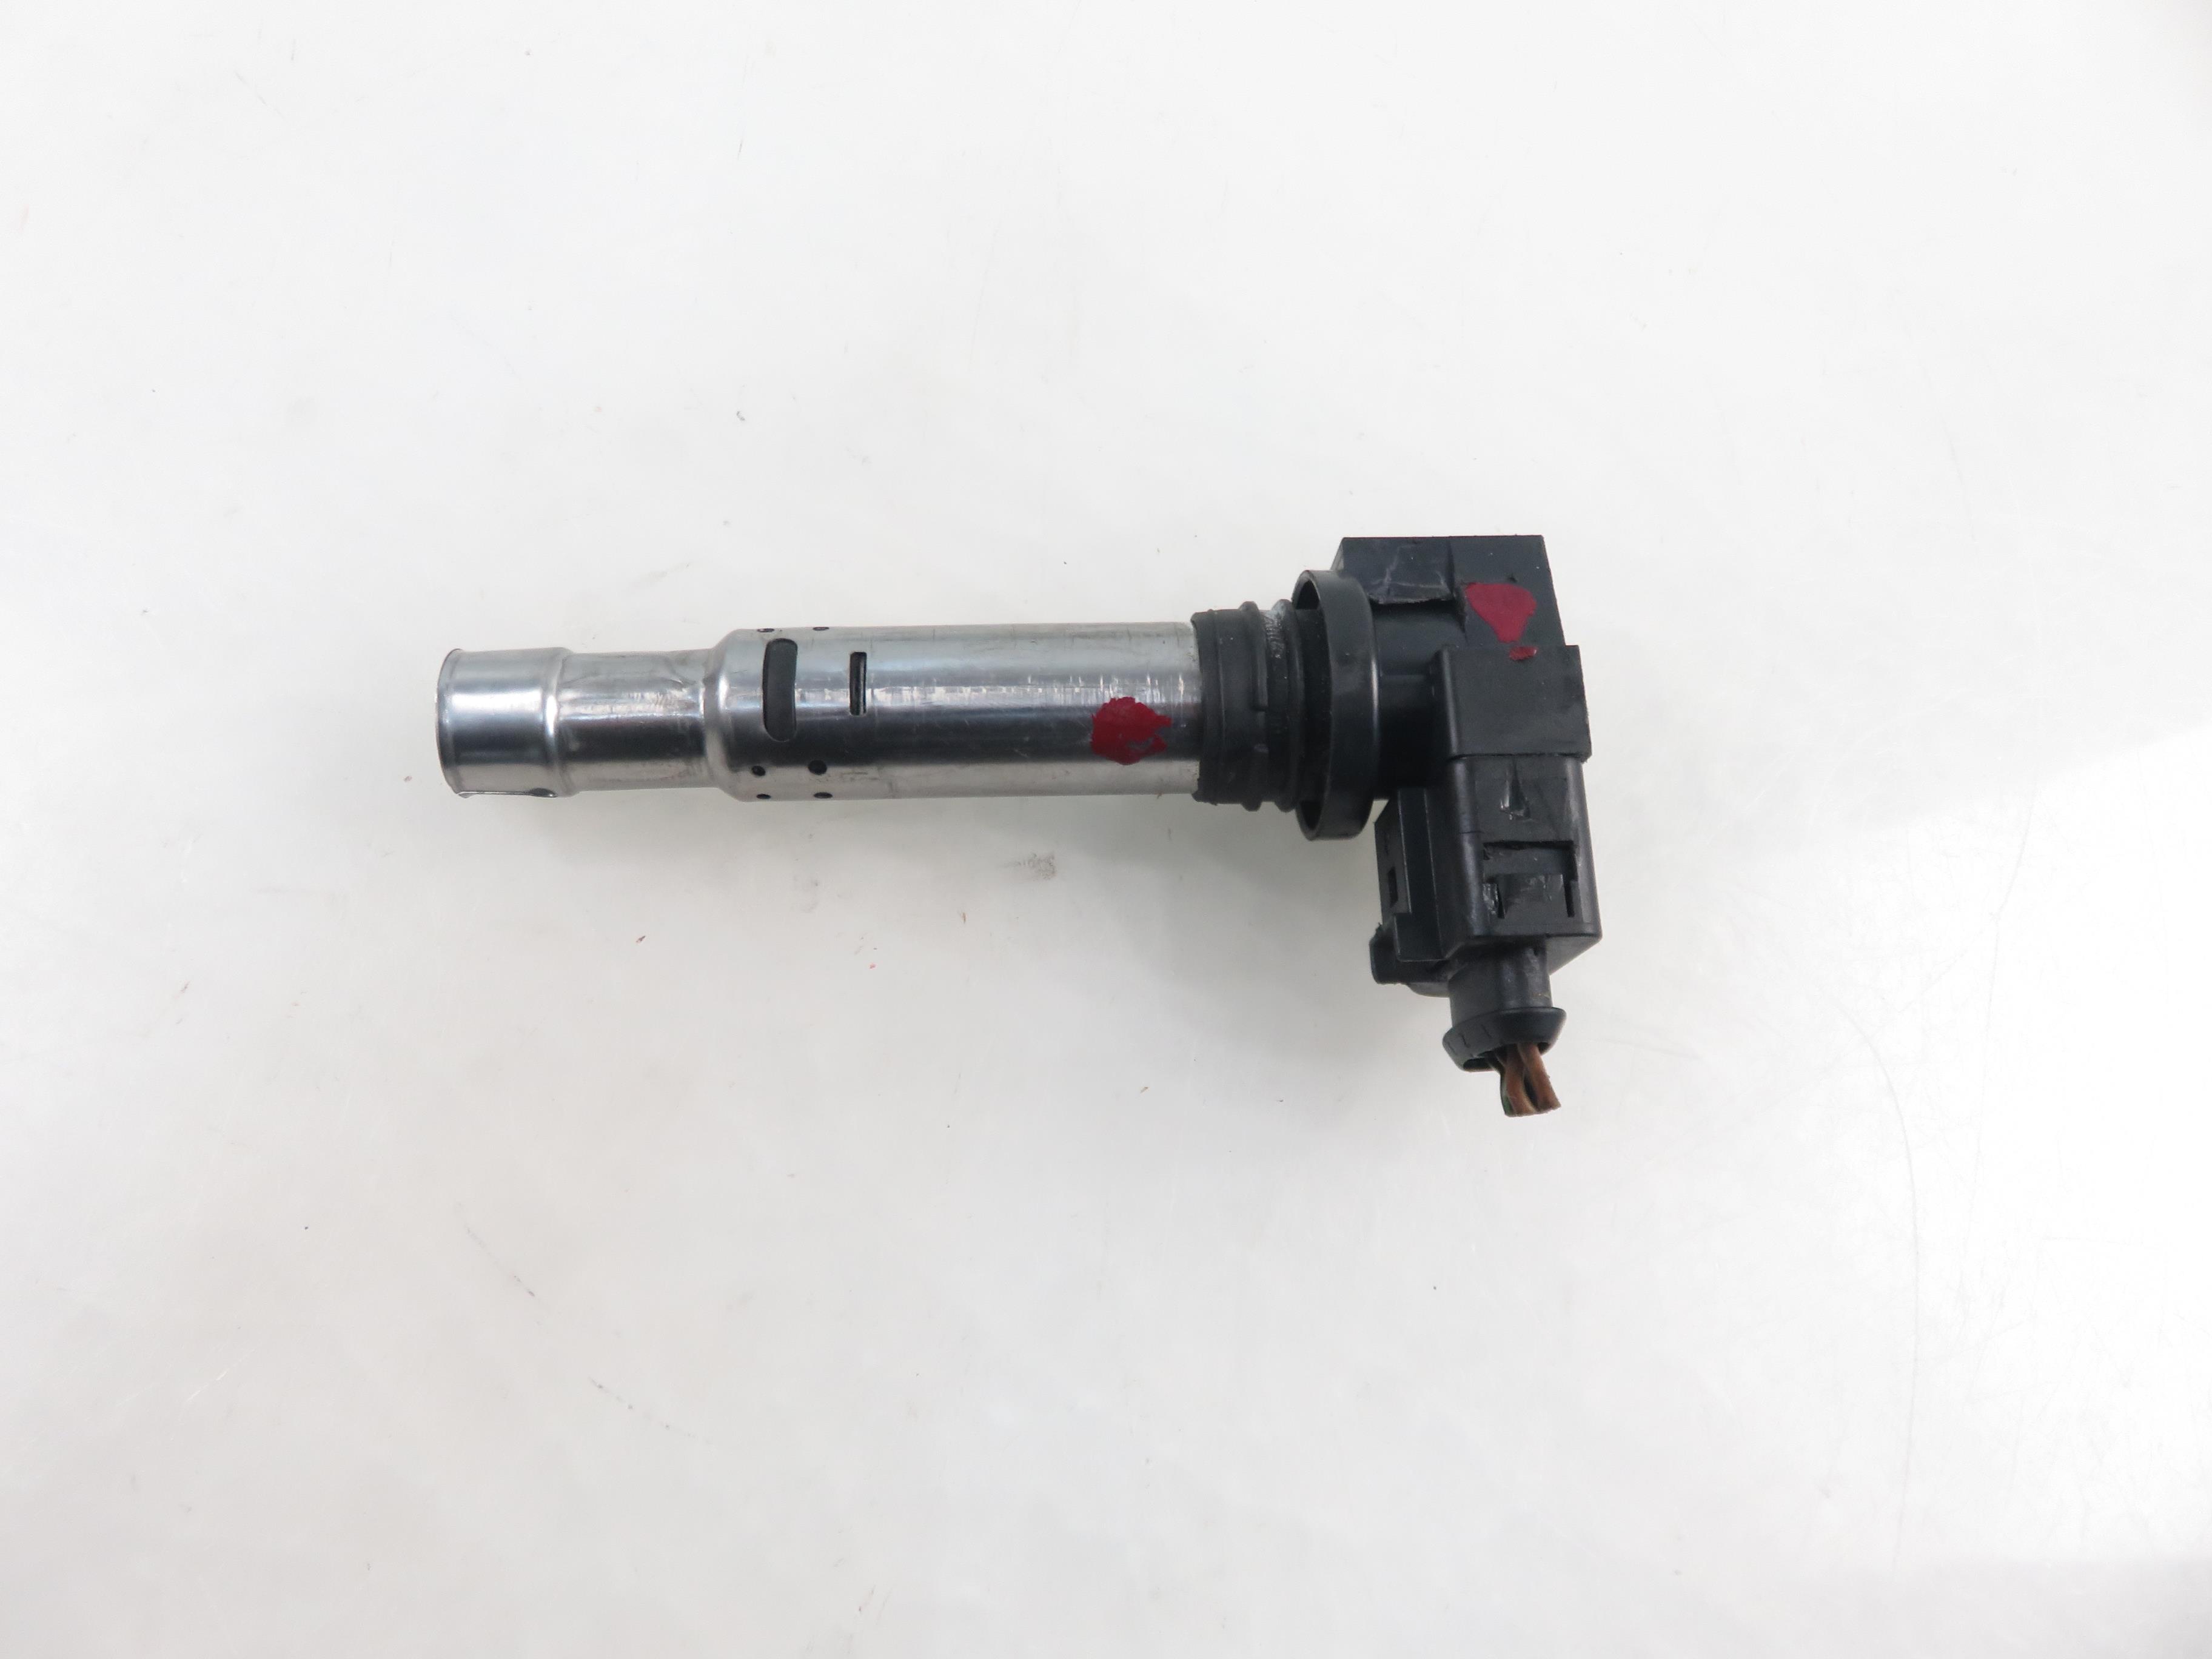 VOLKSWAGEN Polo 4 generation (2001-2009) High Voltage Ignition Coil R0401S00403, U5002 23401945